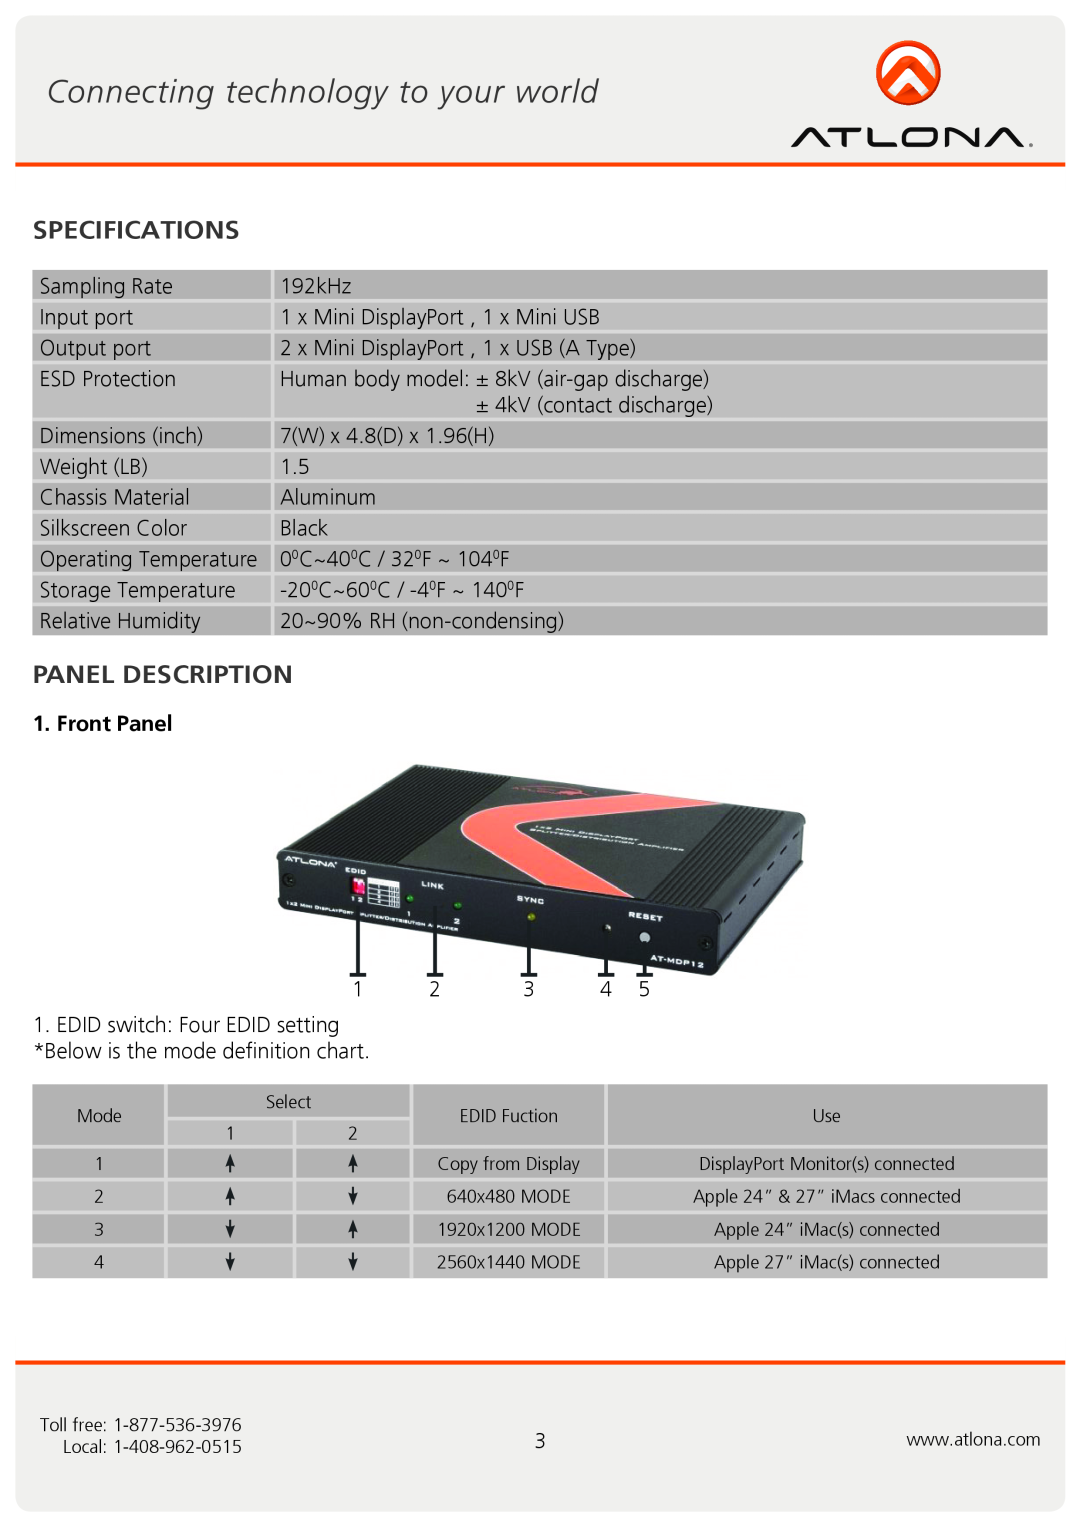 Atlona AT-MDP12 user manual Specifications, Panel Description, Front Panel 